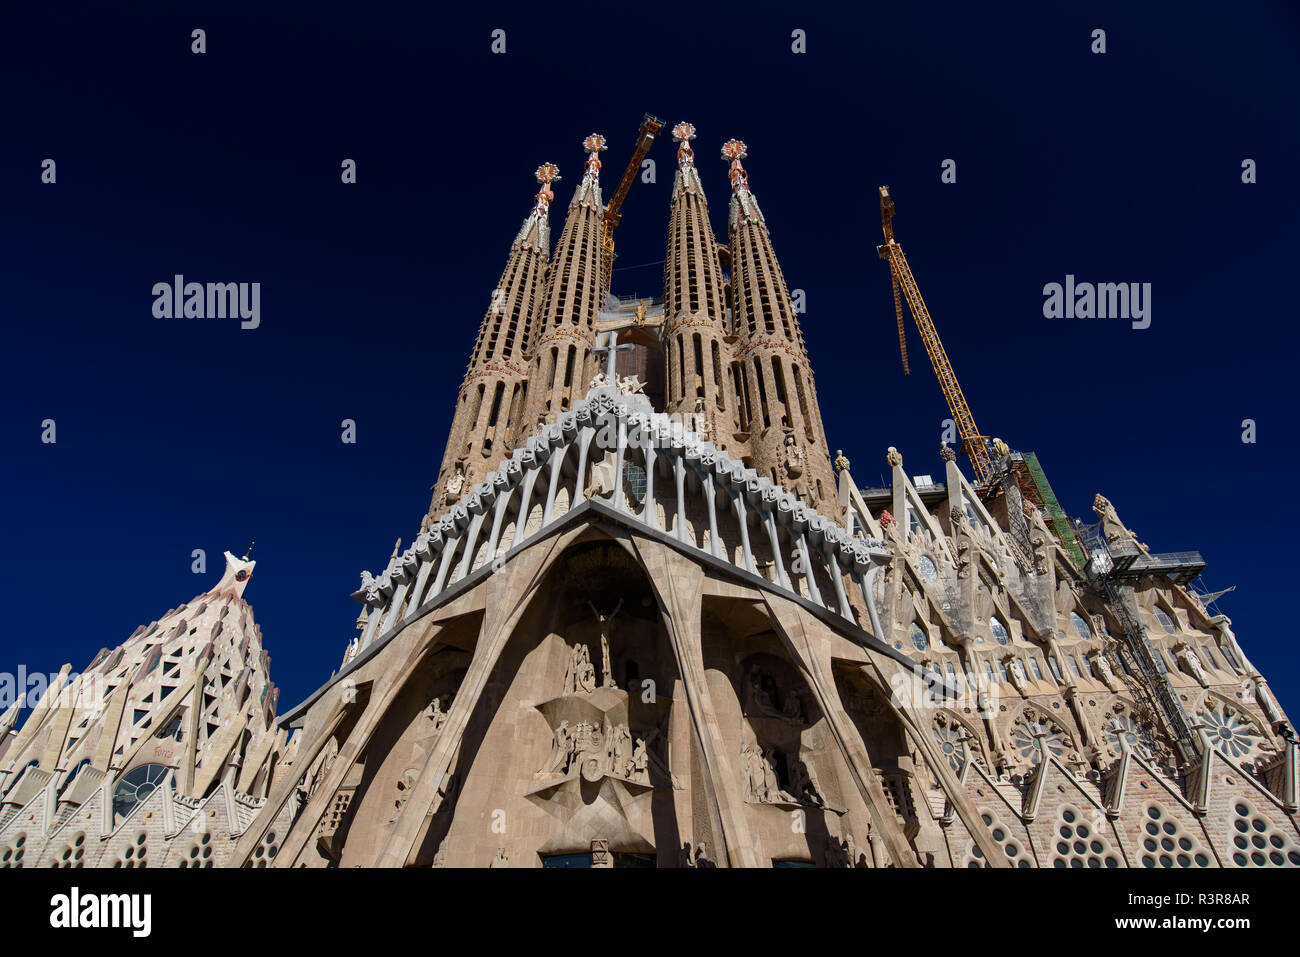 Passion Façade of Sagrada Familia, the cathedral designed by Gaudi in Barcelona, Spain Stock Photo